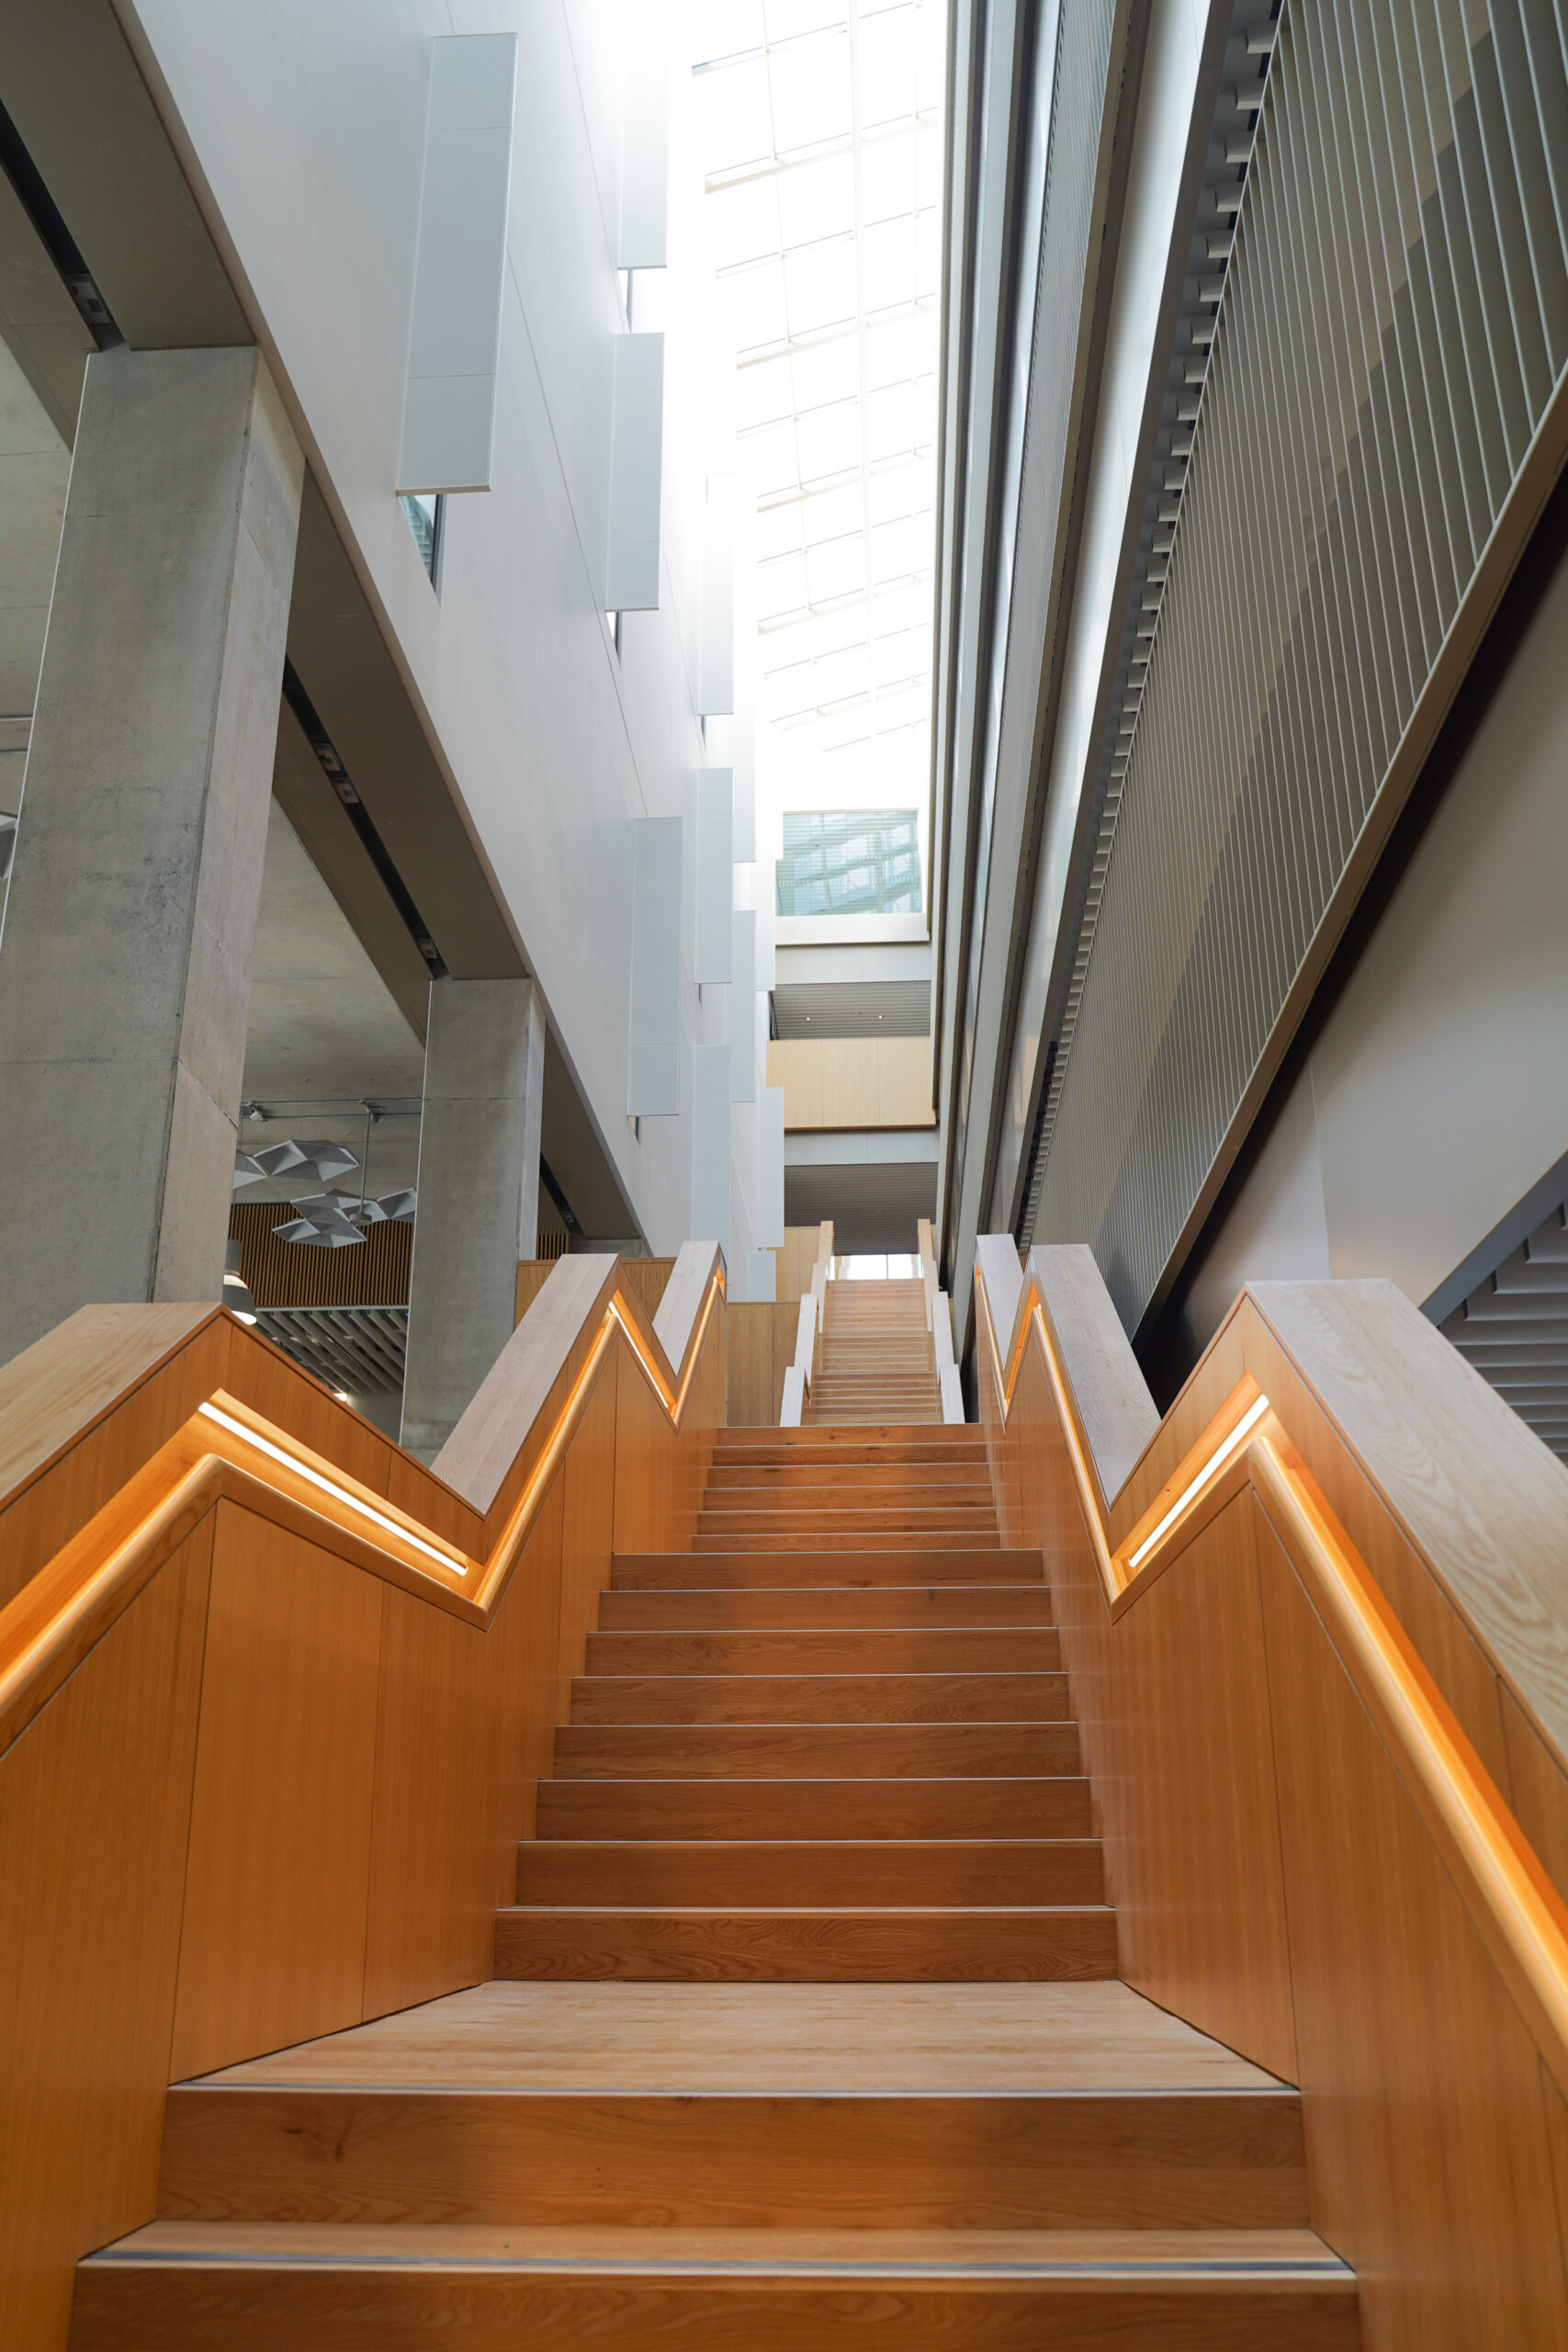 Central circulation stair